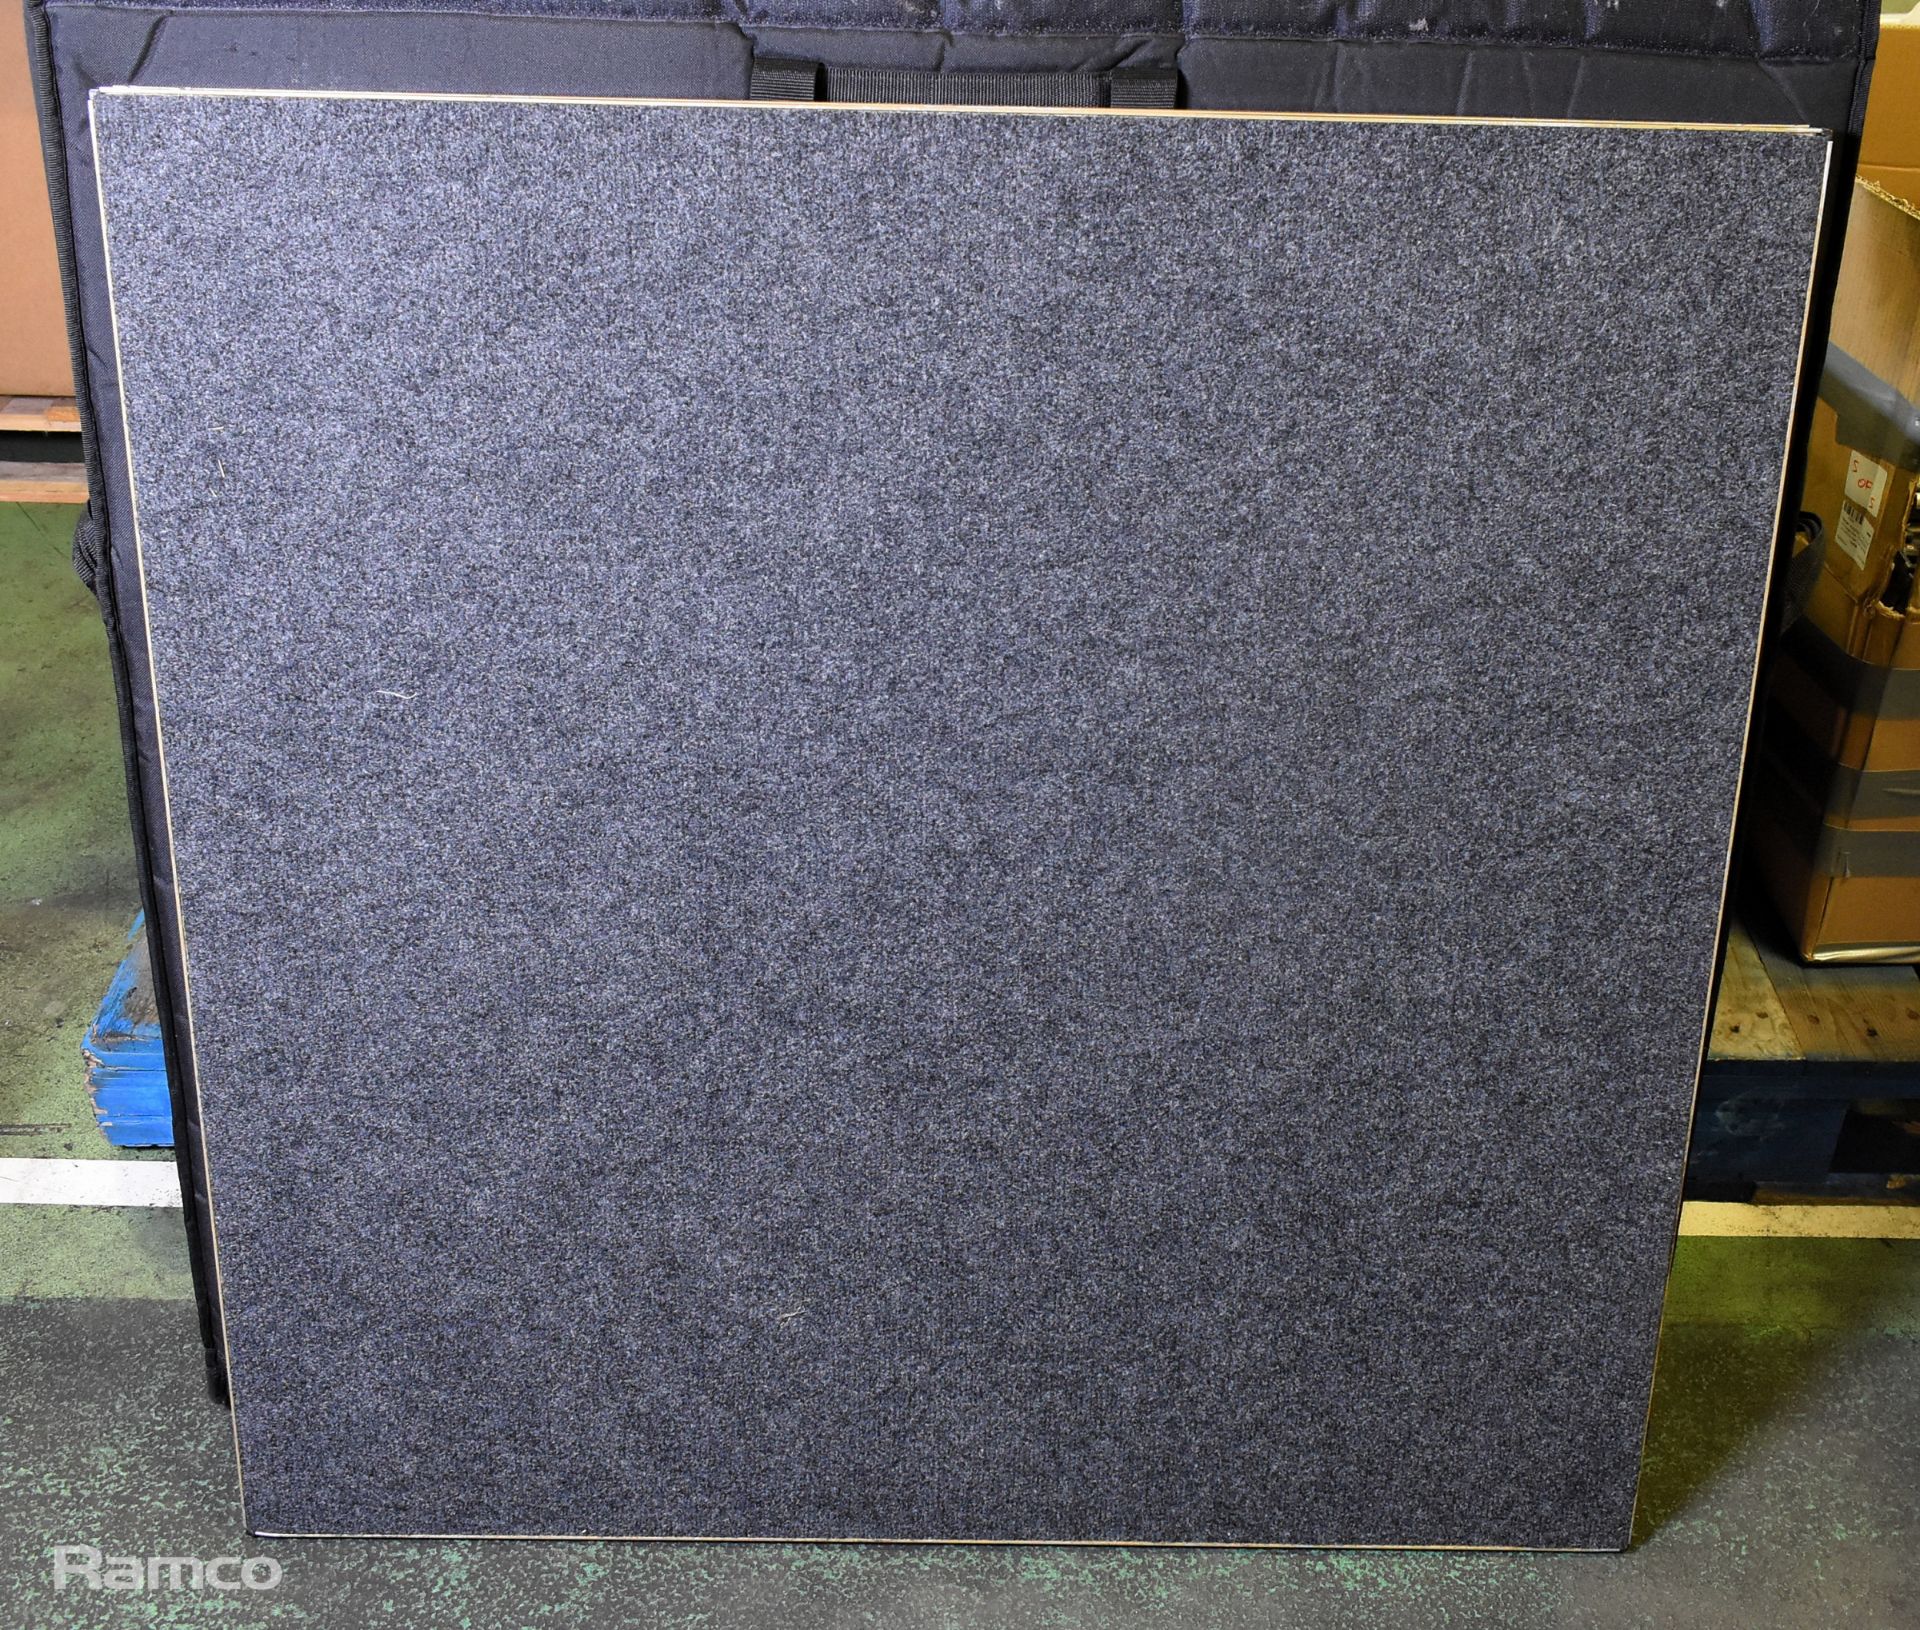 Nexgen Staging - 16 of 1m x 1m stage tops, 19x 300mm concertina riser, includes joining plates - Image 7 of 15